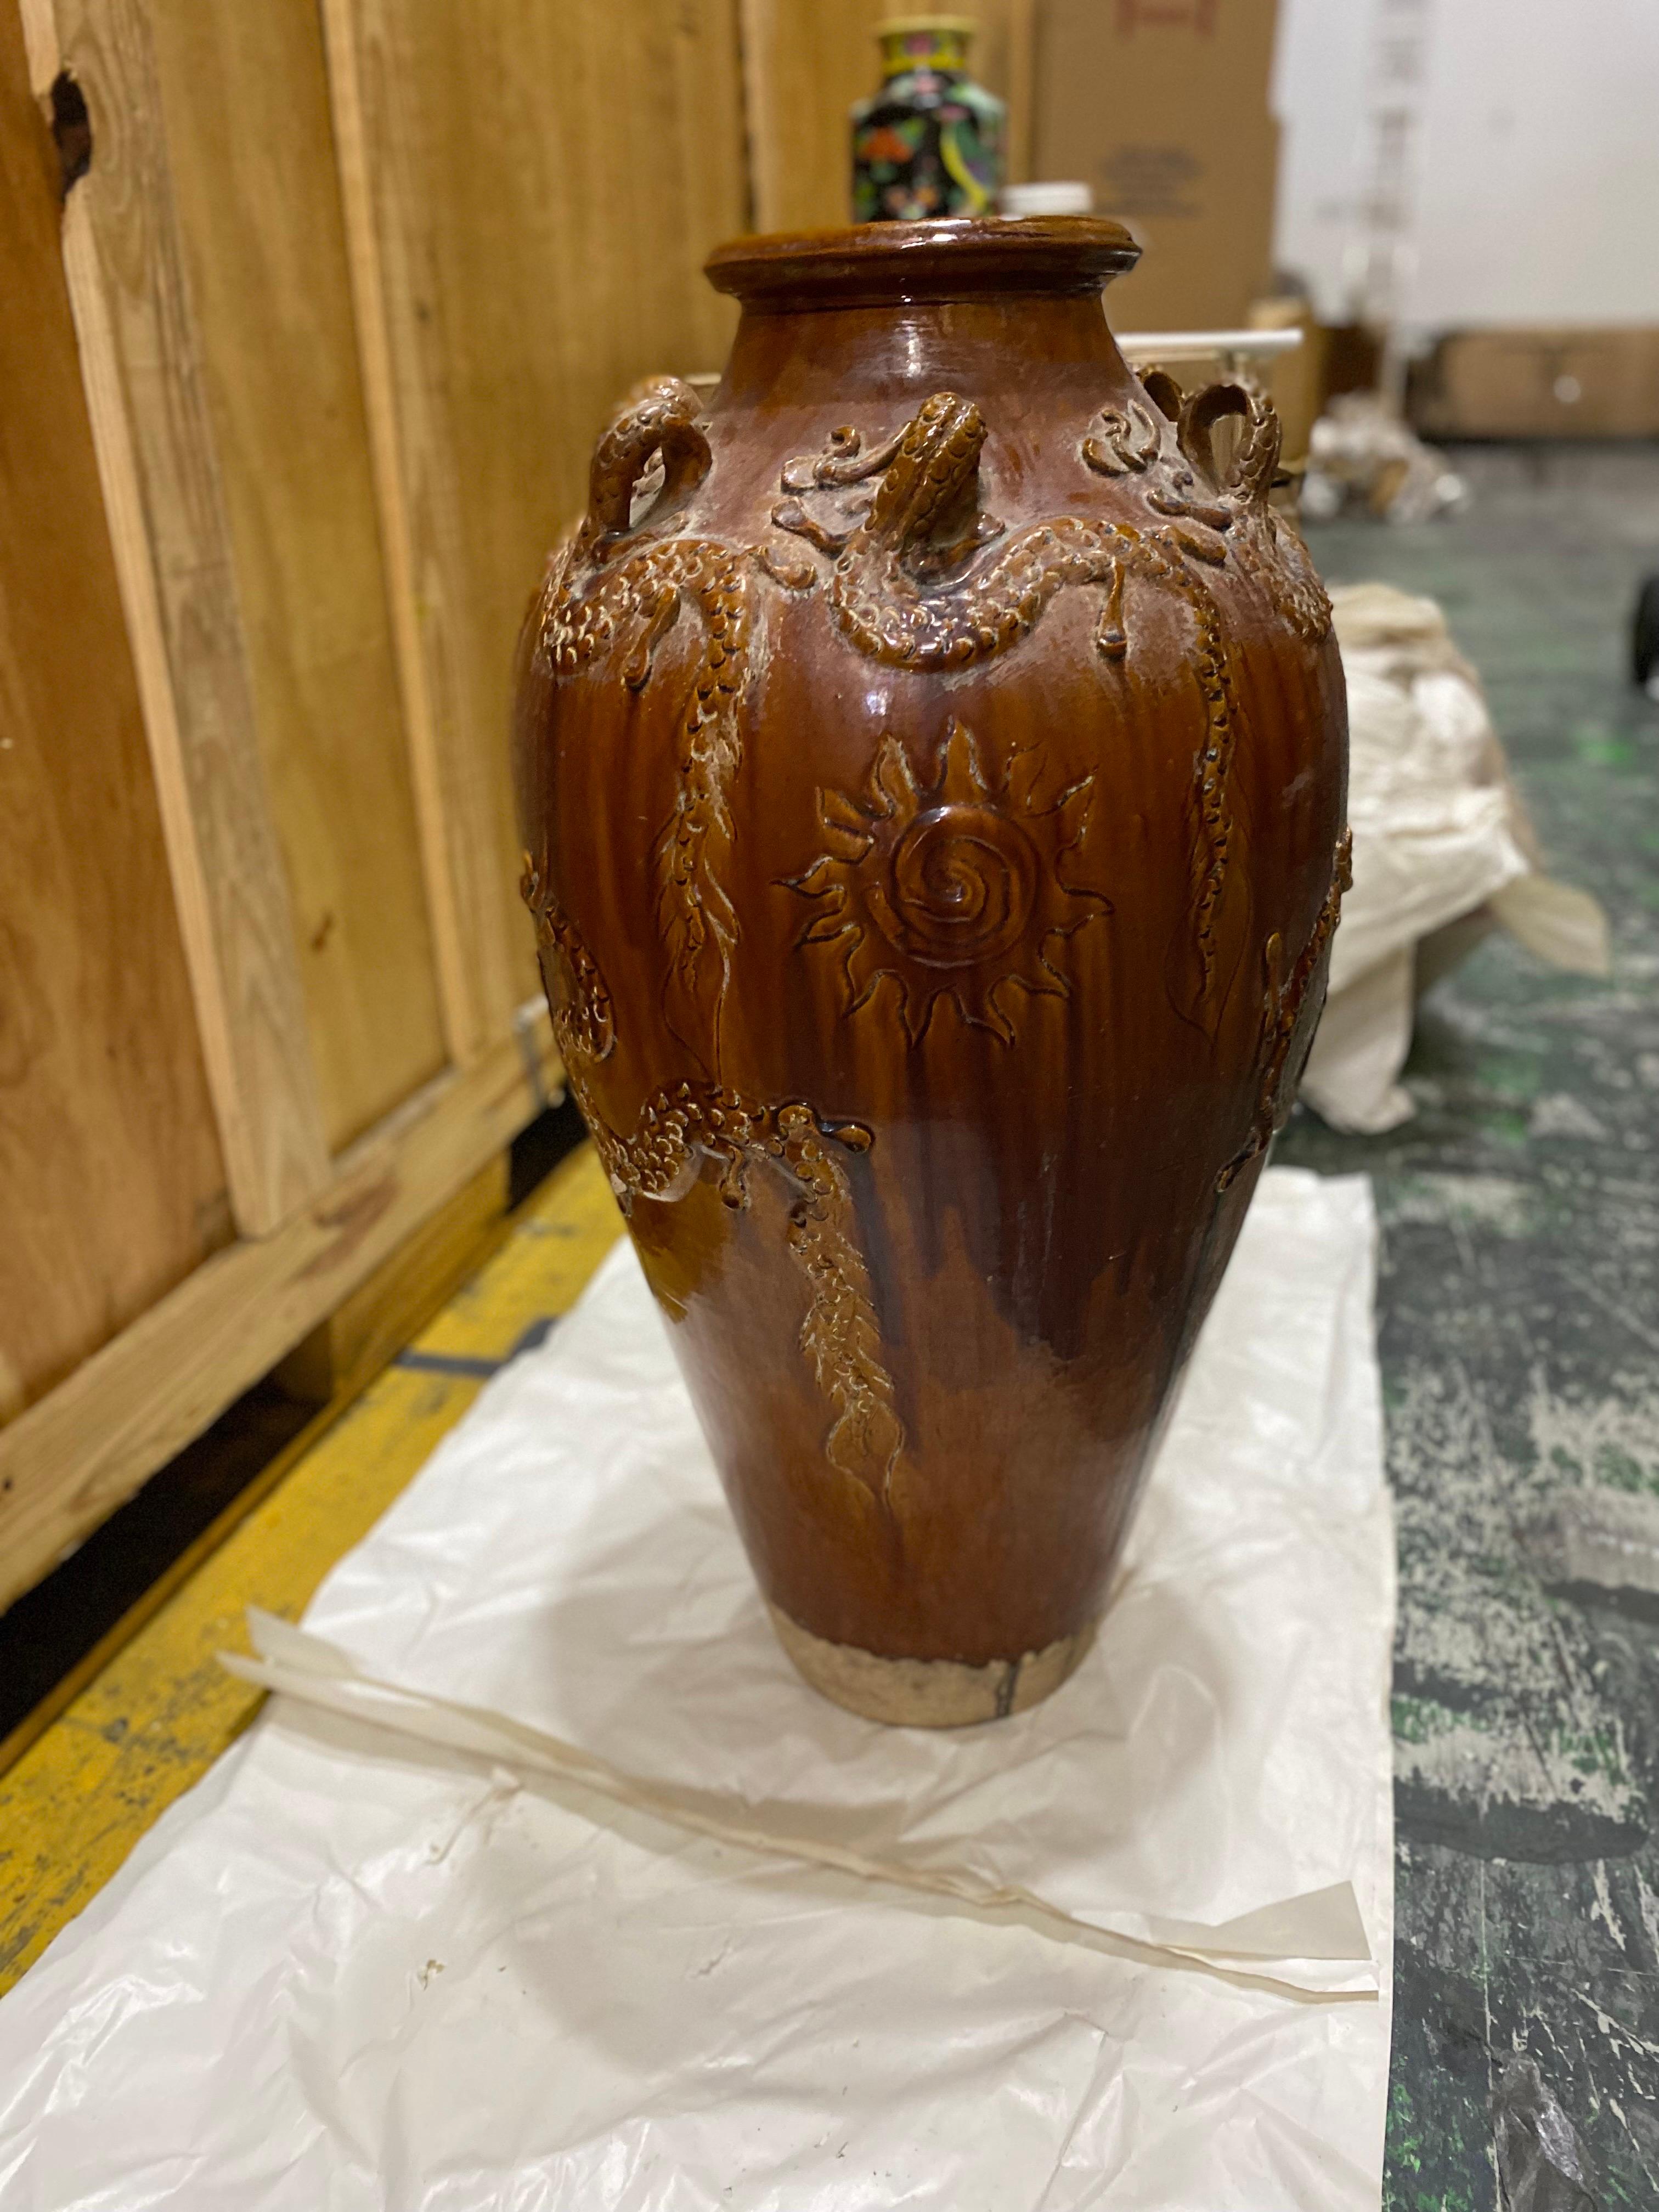 A Large Chinese Ochre brown glazed martaban jar with dragon motifs.
A beautiful large dark brown ochre glazed jar with broad shoulders and a thick-lipped narrow mouth. The glaze has a “poured effect” that results in the natural clay at the bottom